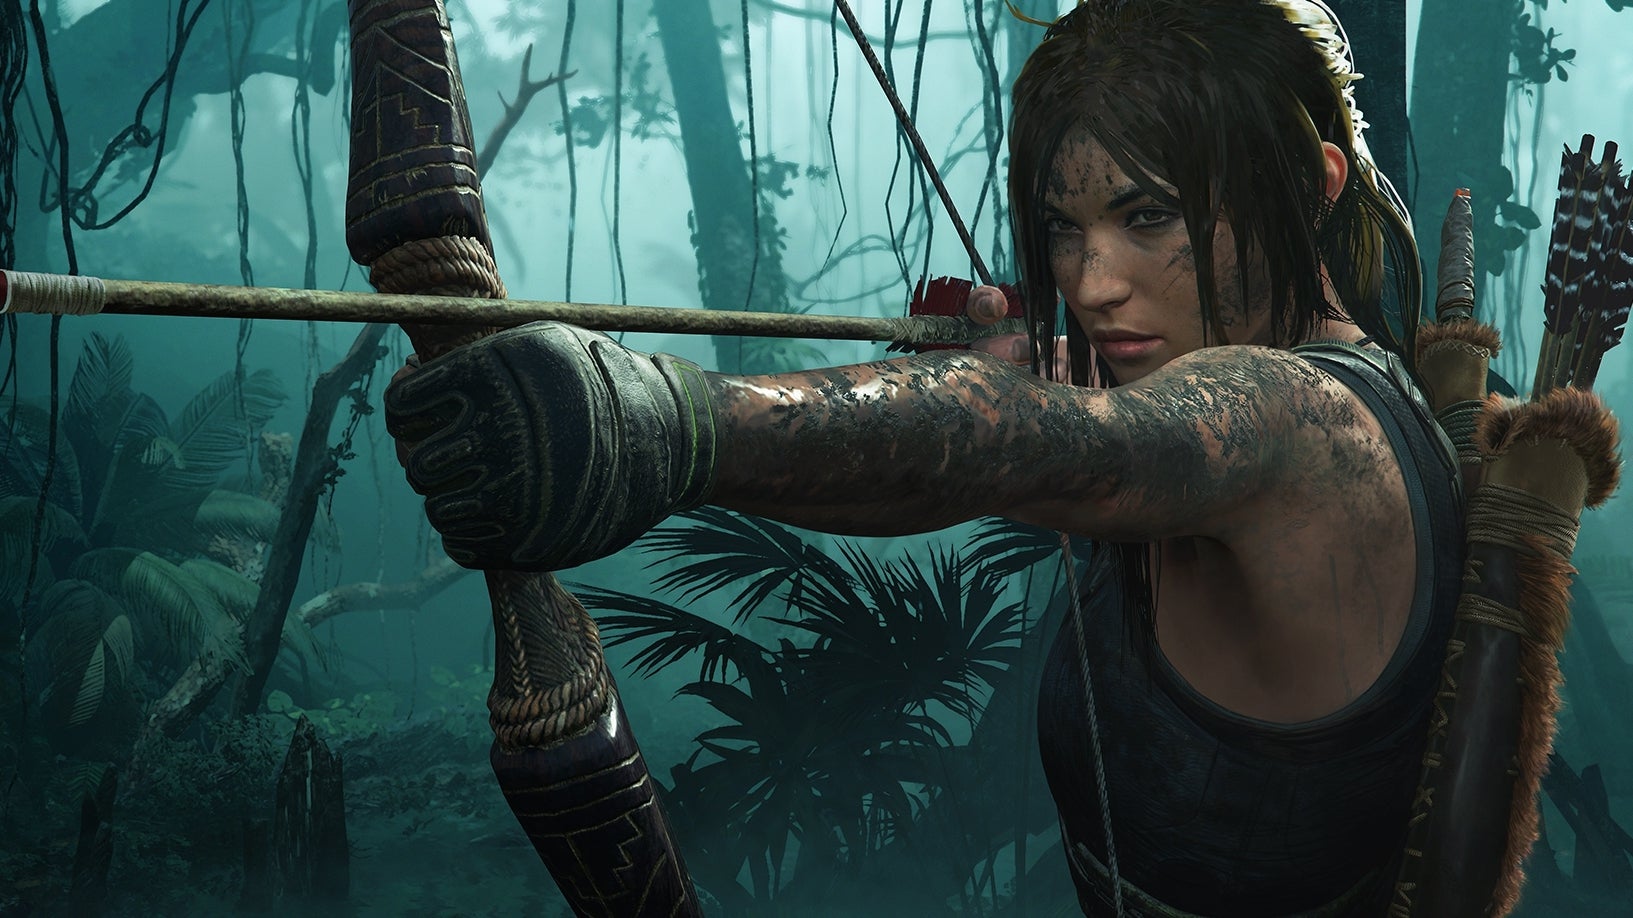 Shadow of Tomb Raider - latest reboot makes small strides but a shadow of the originals | Eurogamer.net